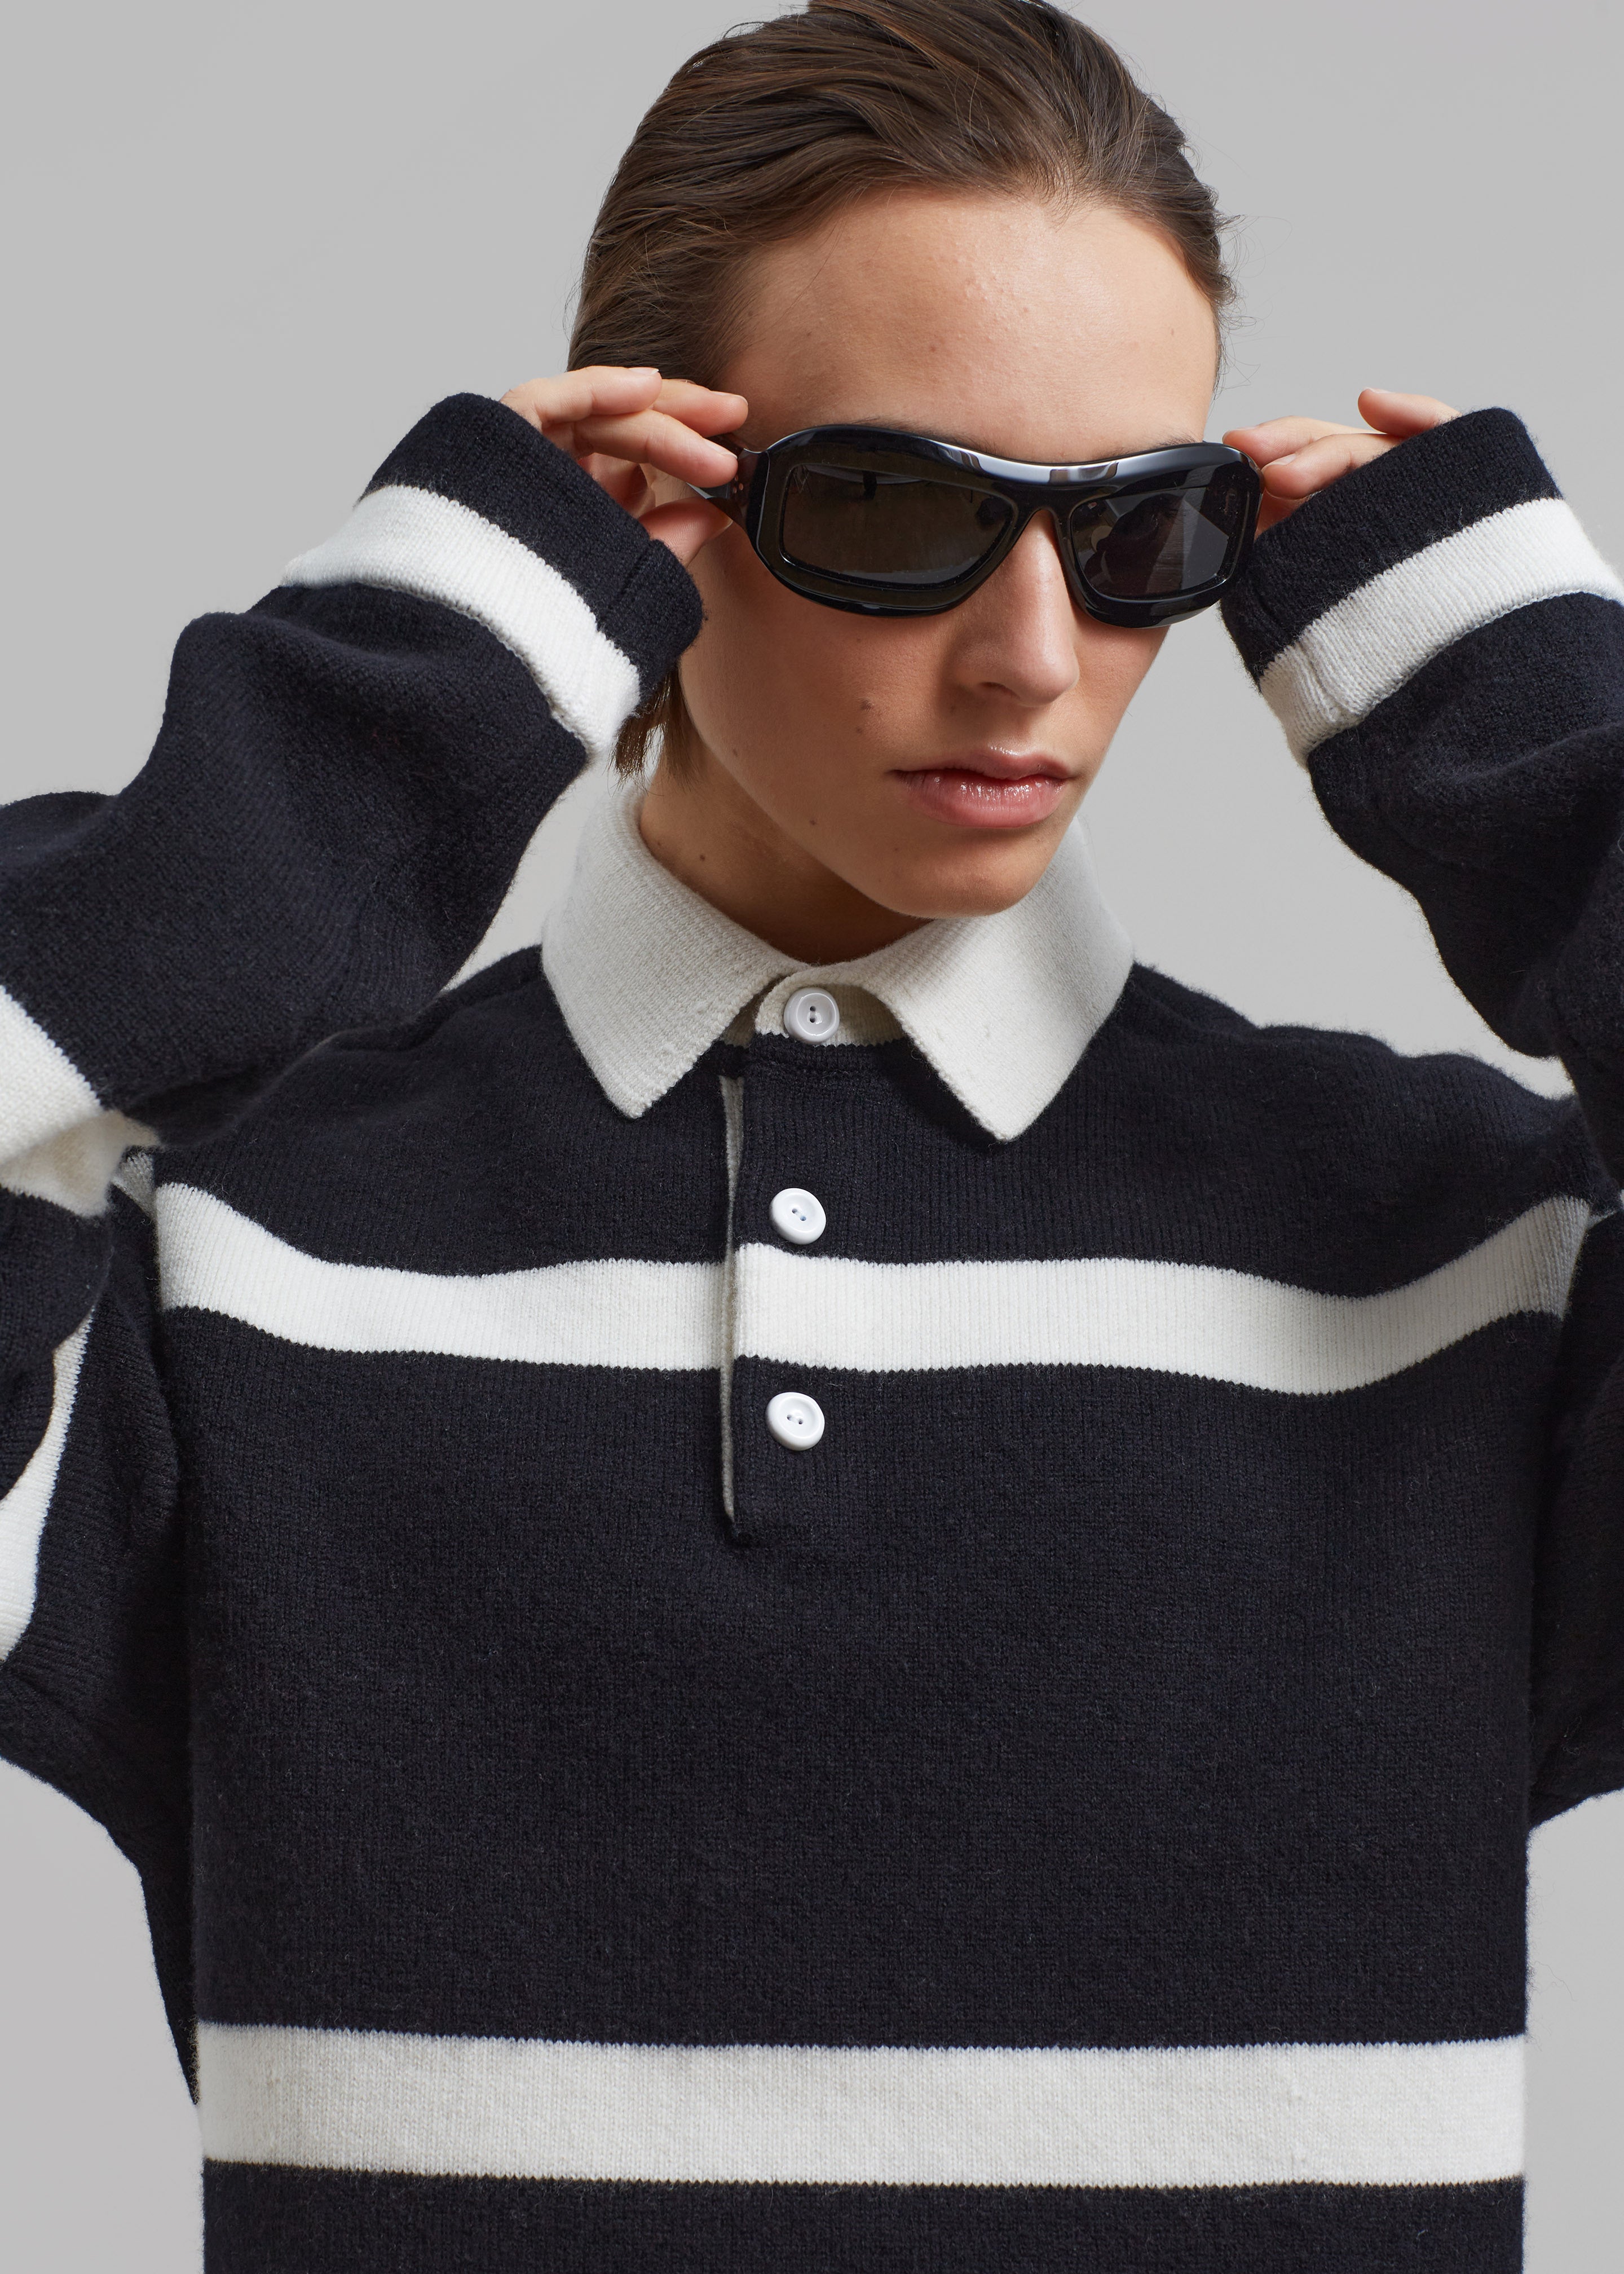 JW Anderson Structured Polo Top - Black - 4